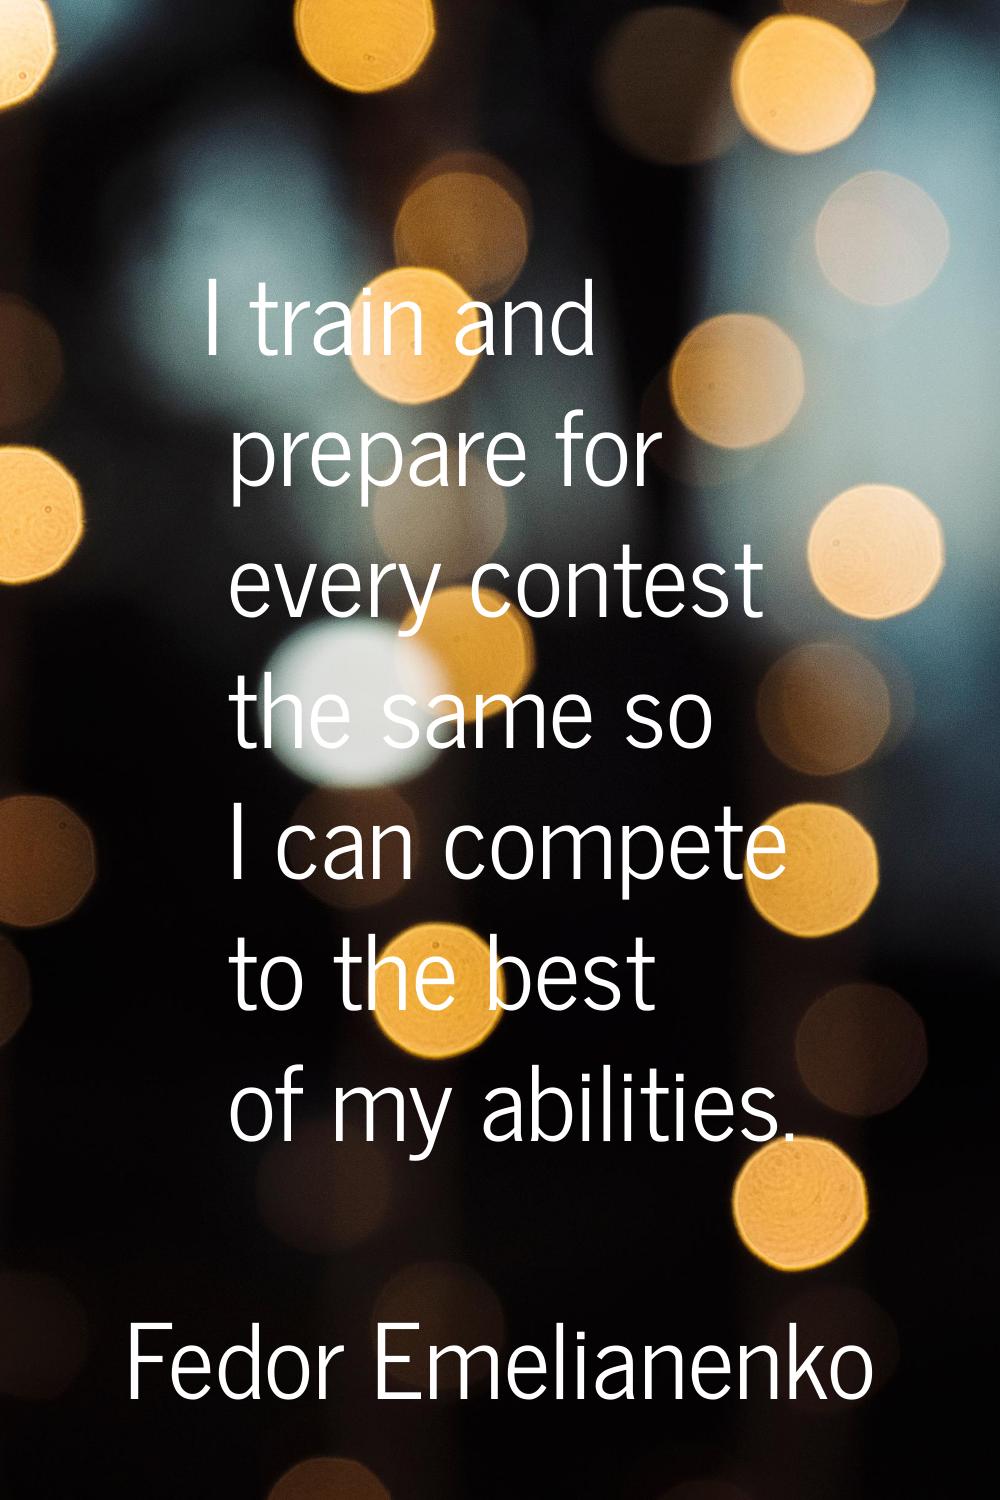 I train and prepare for every contest the same so I can compete to the best of my abilities.